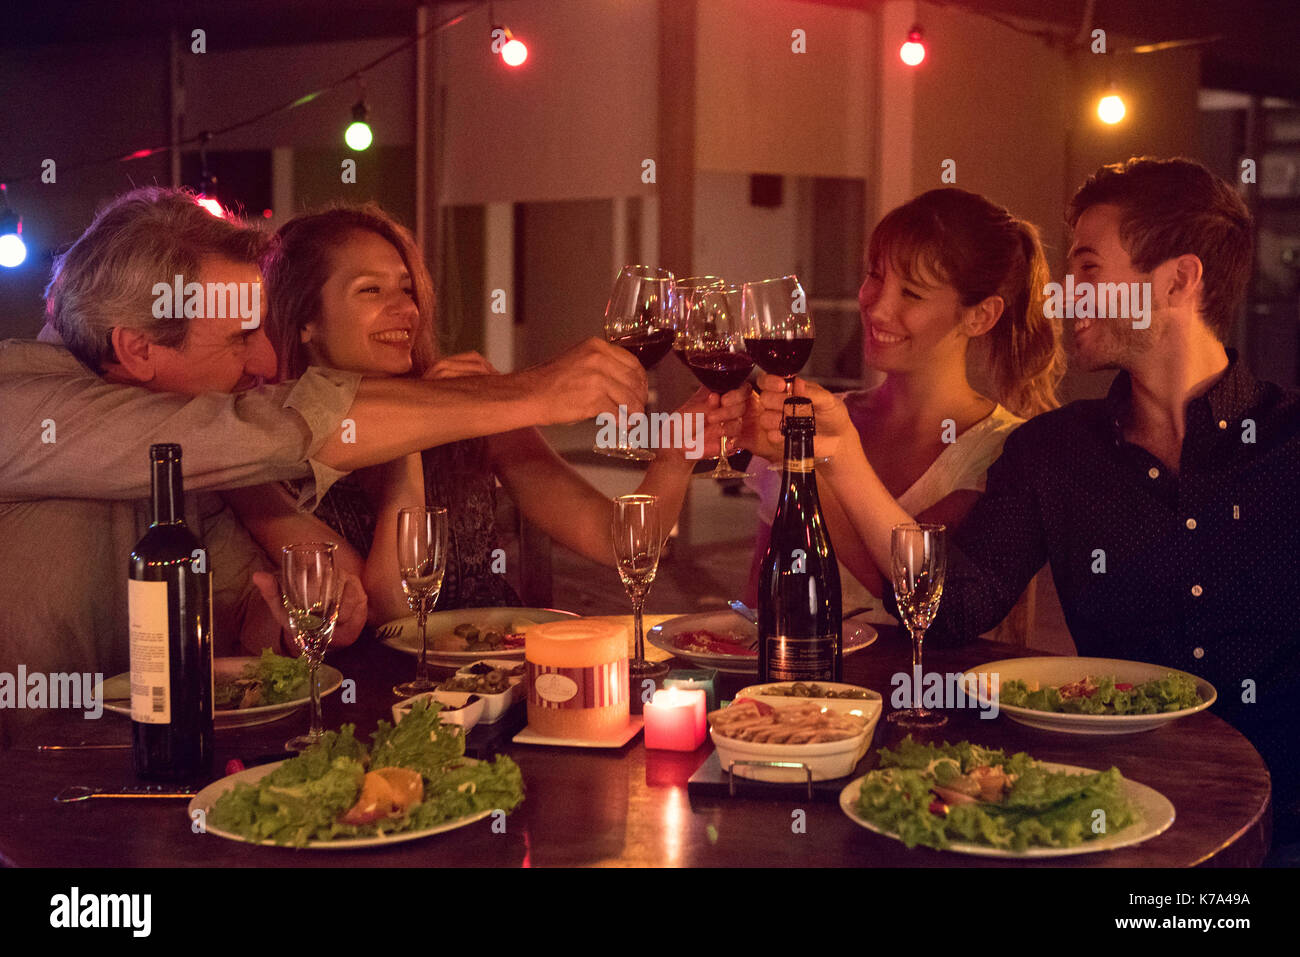 Friends clinking wine glasses at dinner party Stock Photo